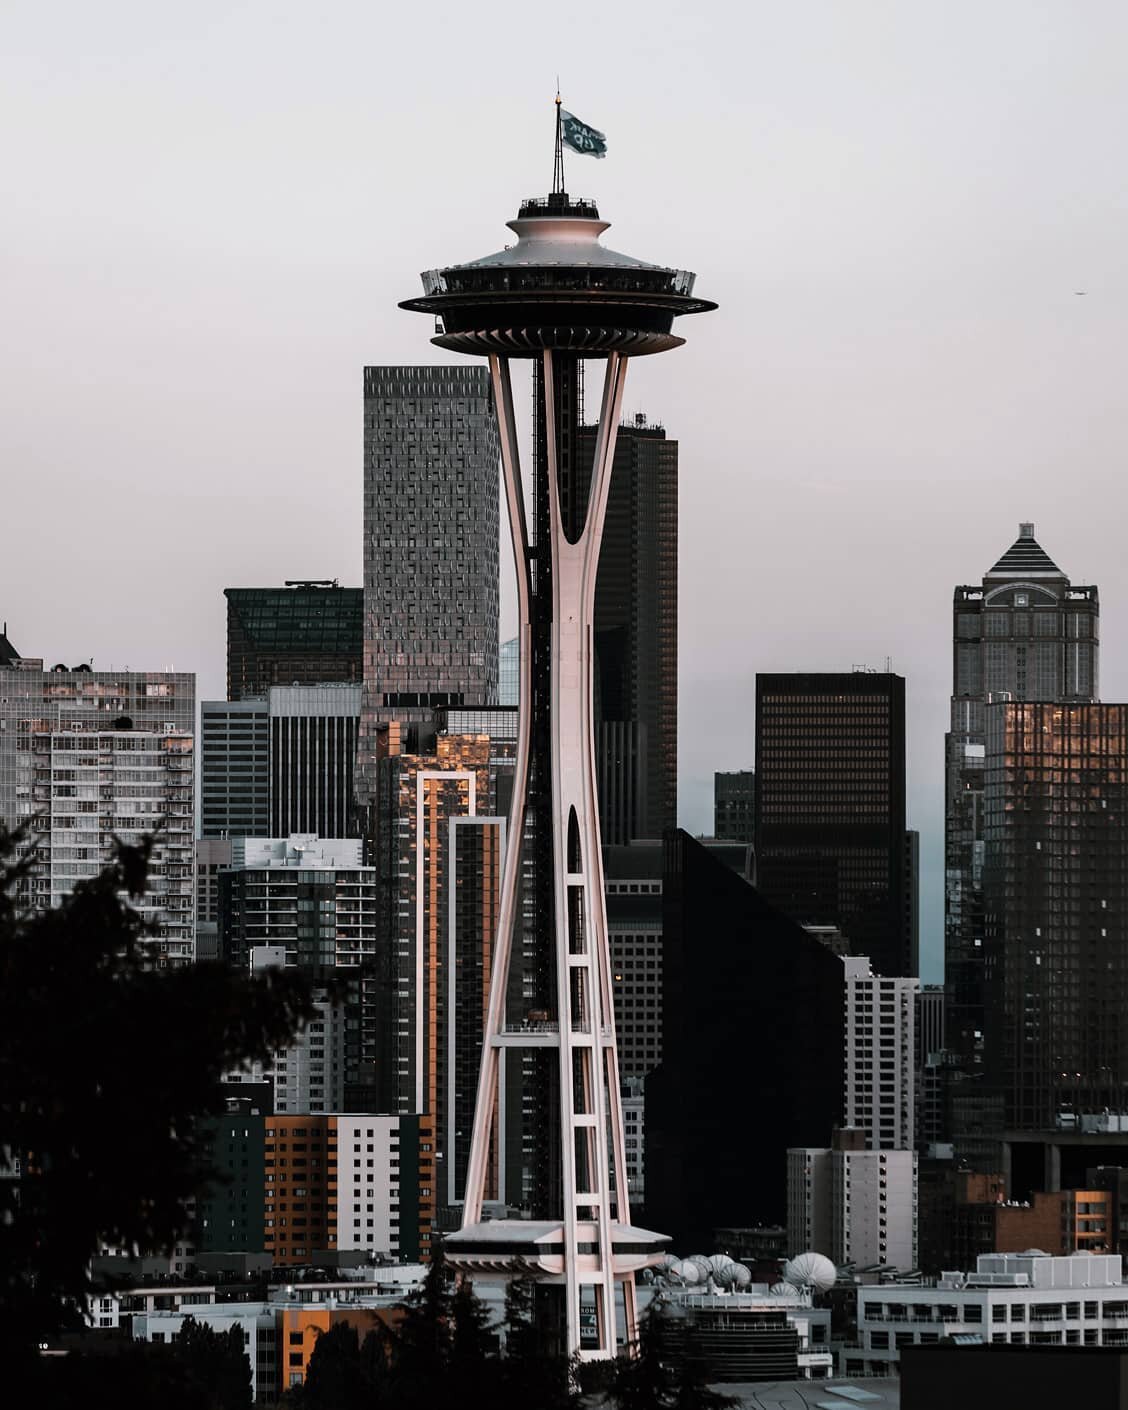 One of the my favorite places spots for a view of the @spaceneedle is at Kerry Park. Make sure you bring a zoom lens!

#visitseattle #kerrypark #helloseattle #pacificnorthwest #nomadict #hellofrom #visionarytravel #mtrainier #pnwonderland #pnwadventu